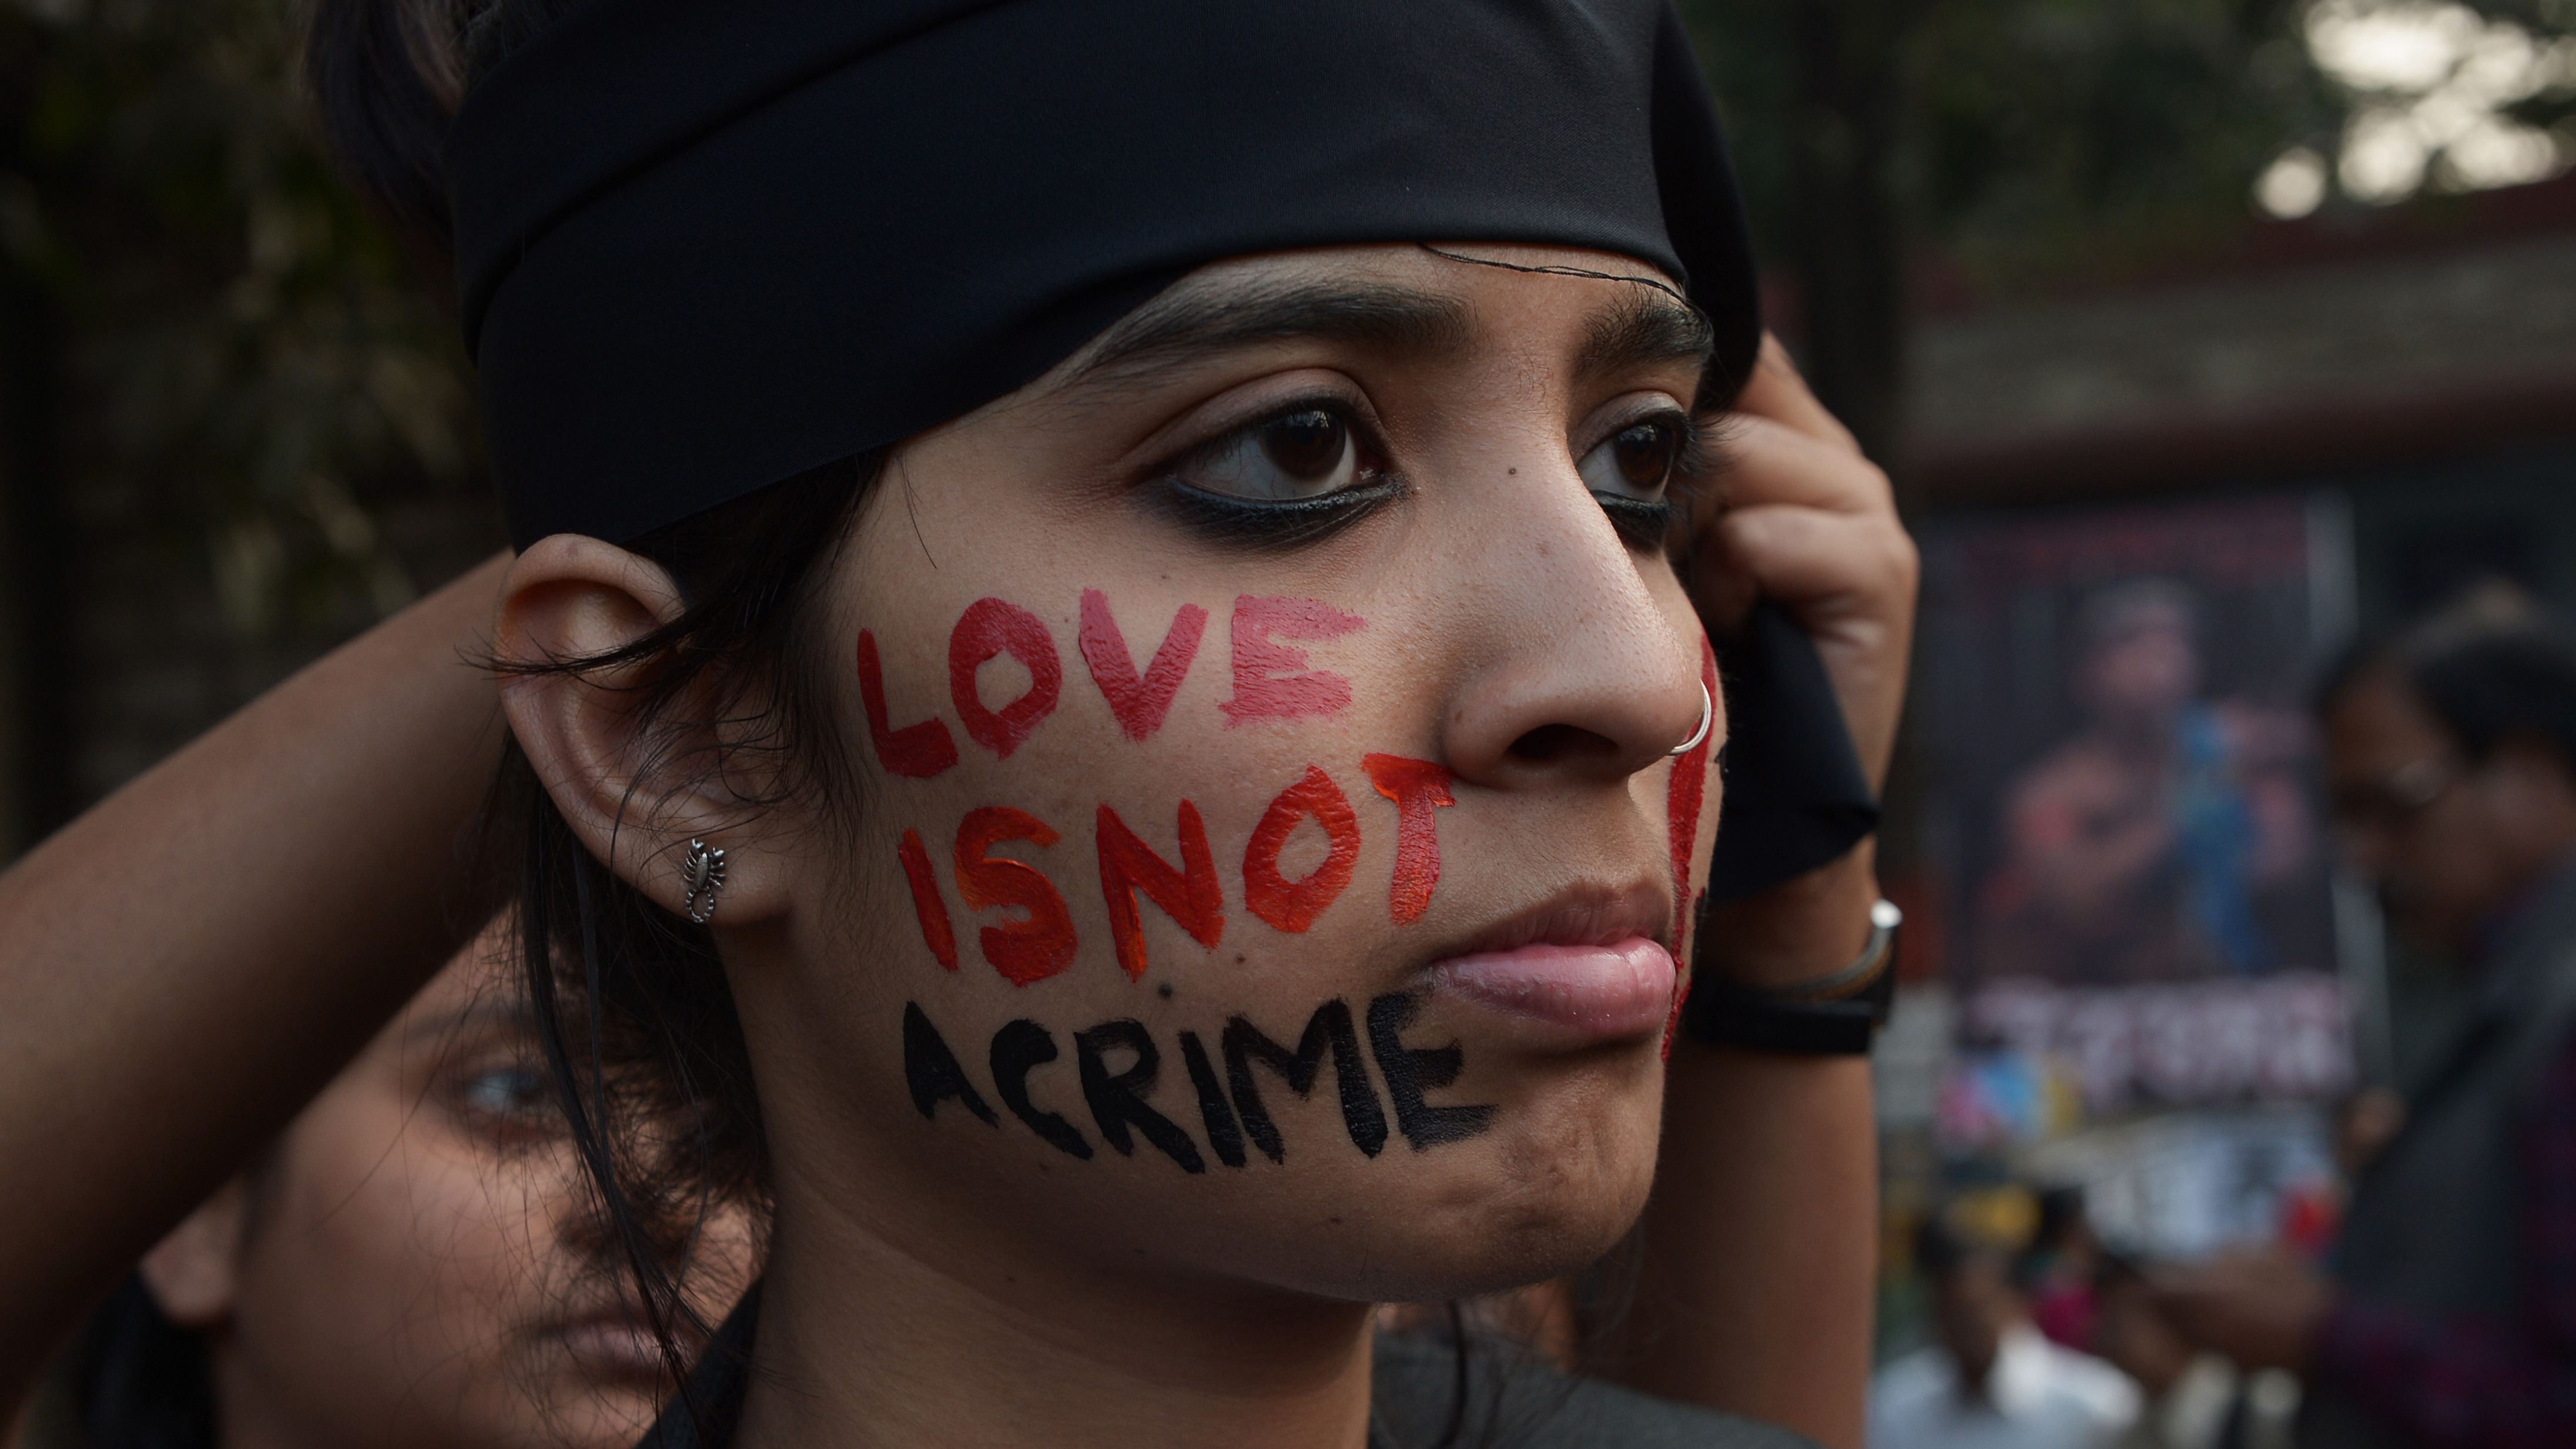 An Indian gay-rights activist takes part in a protest in Kolata against the 2013 Supreme Court ruling reinstating a ban on gay sex.